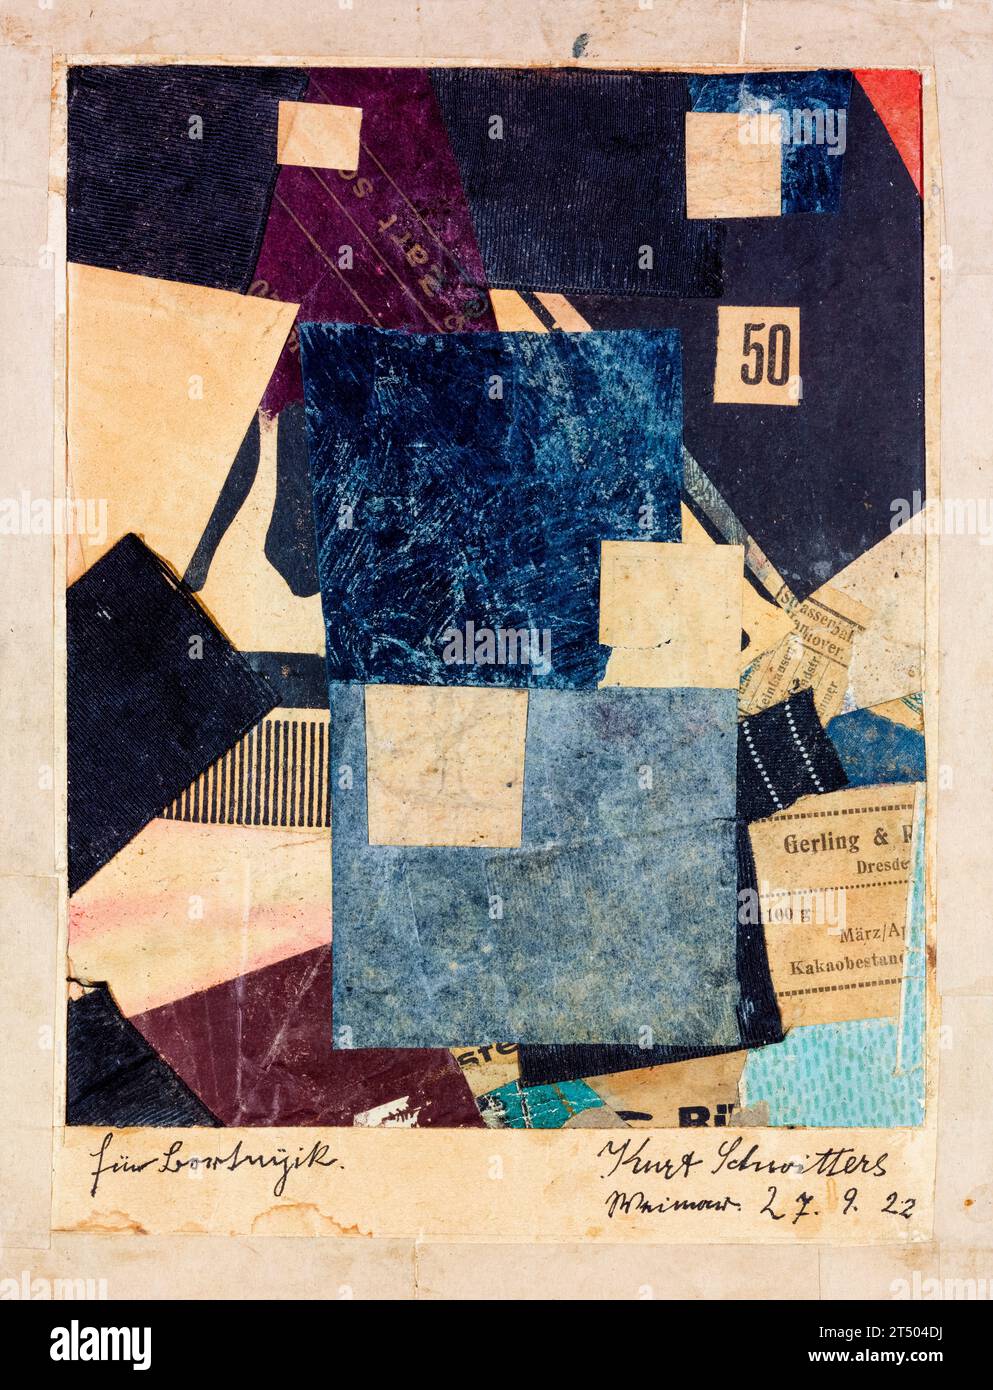 Kurt Schwitters, Merz 50: Composition, abstract painting and collage, 1922 Stock Photo